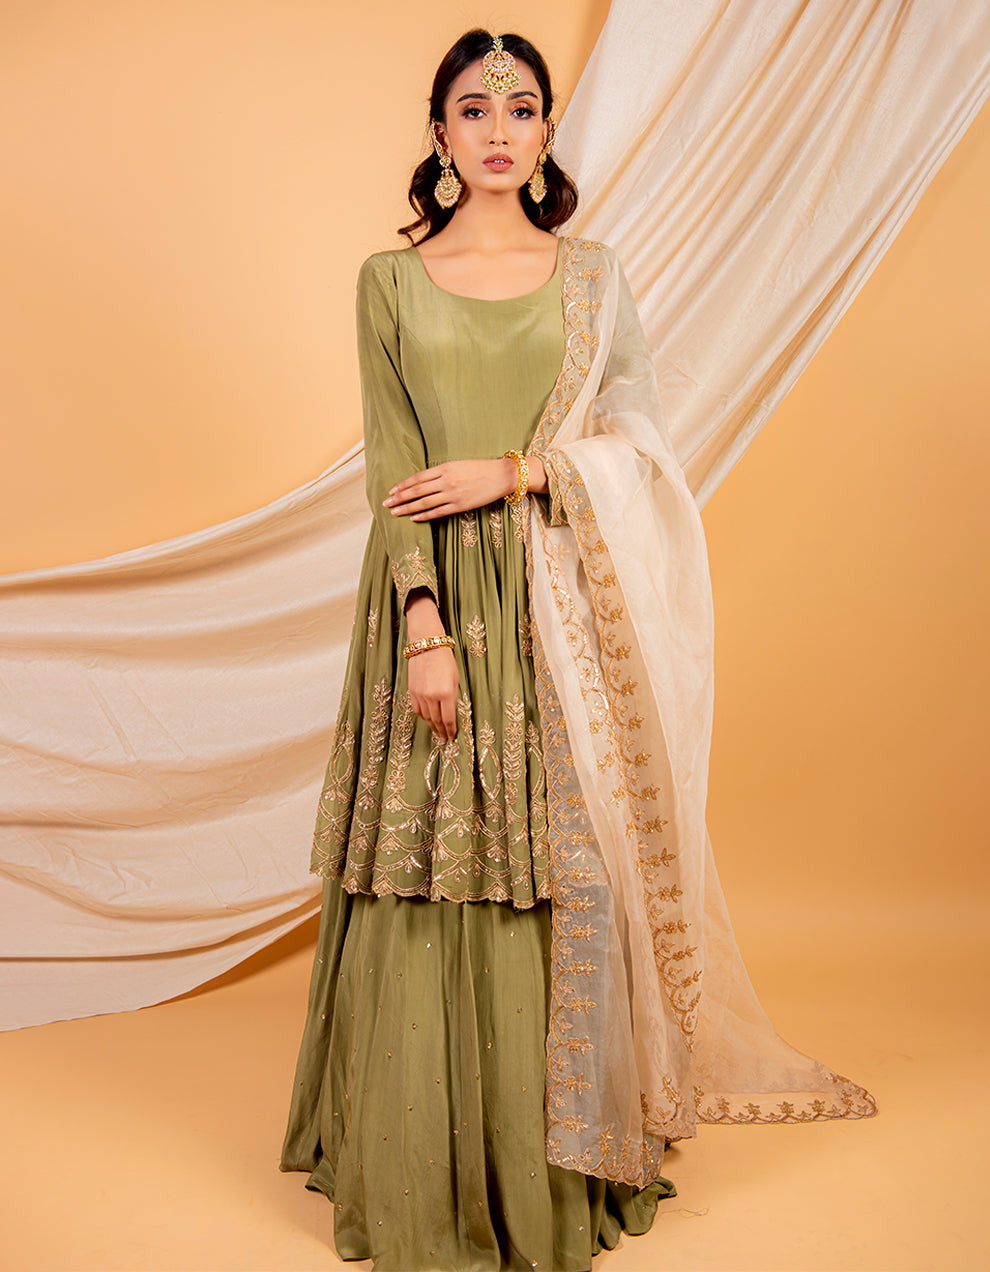 Buy-best-Green-embroidered-Kurti-with-skirt-and-dupatta-dress-for-women-in-IndiaBuy-best-Green-embroidered-Kurti-with-skirt-and-dupatta-dress-for-women-in-India